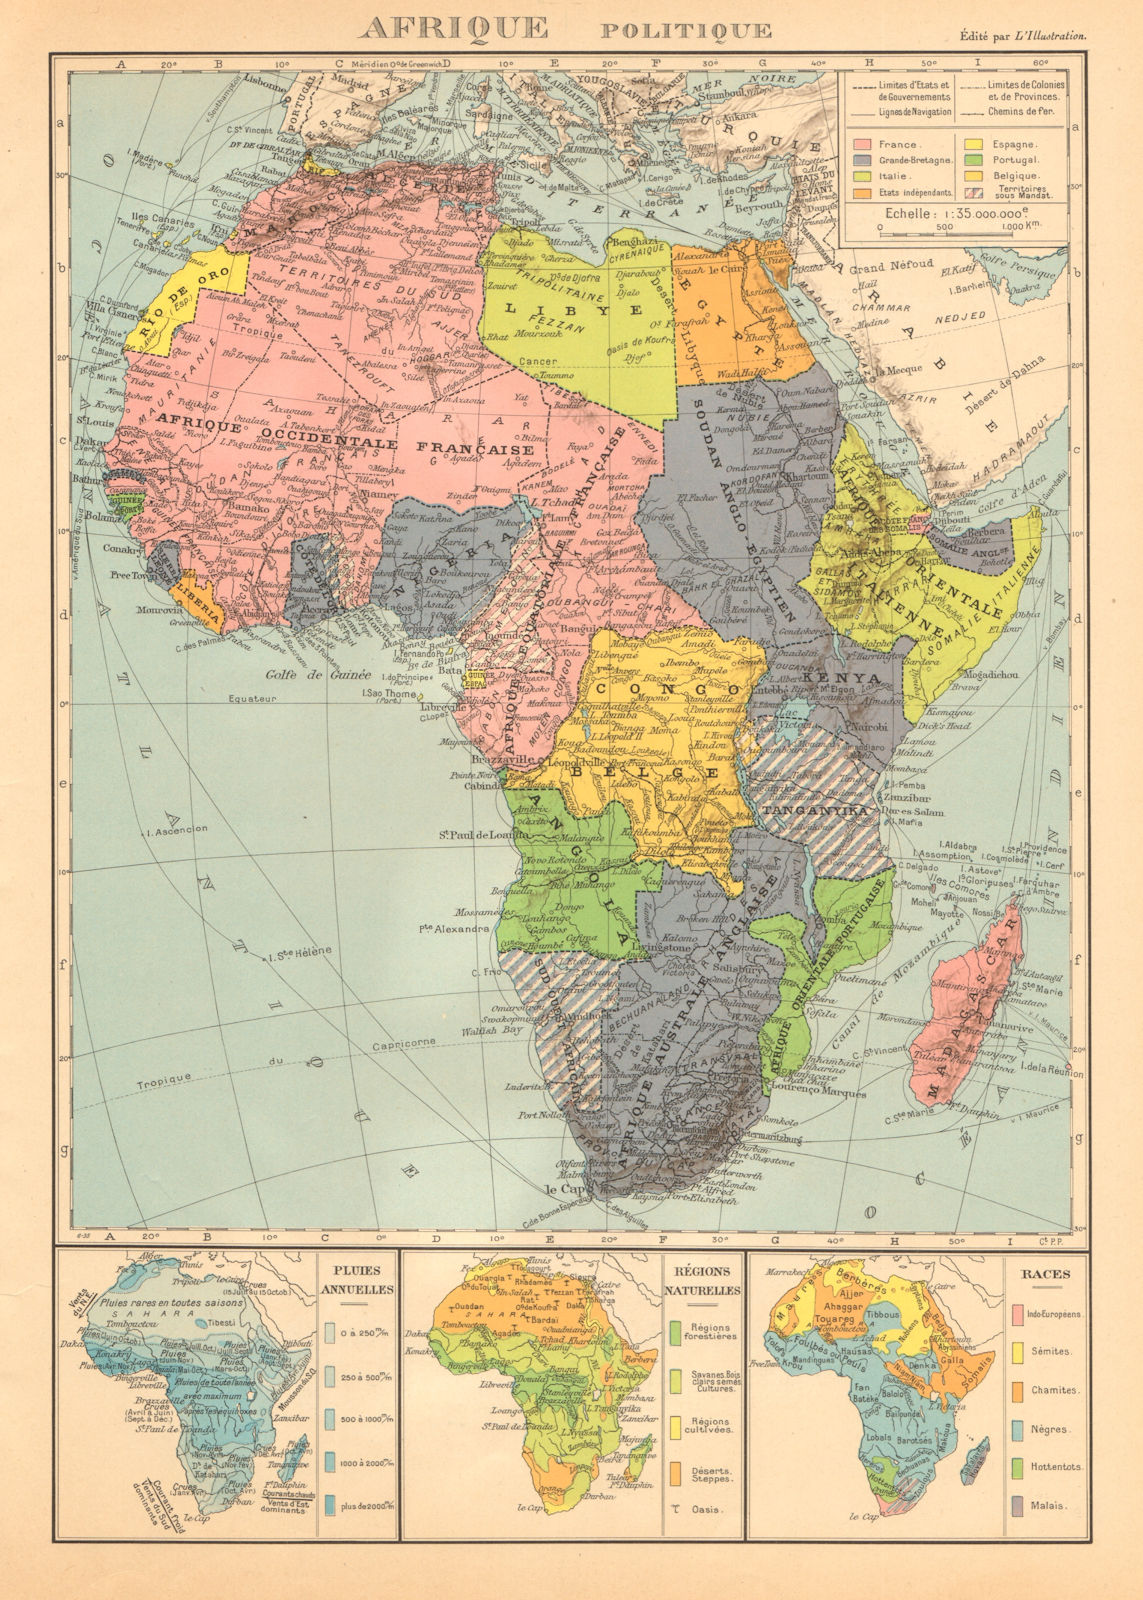 Associate Product COLONIAL AFRICA Afrique. League of Nations Mandates. Ethnicity 1938 old map